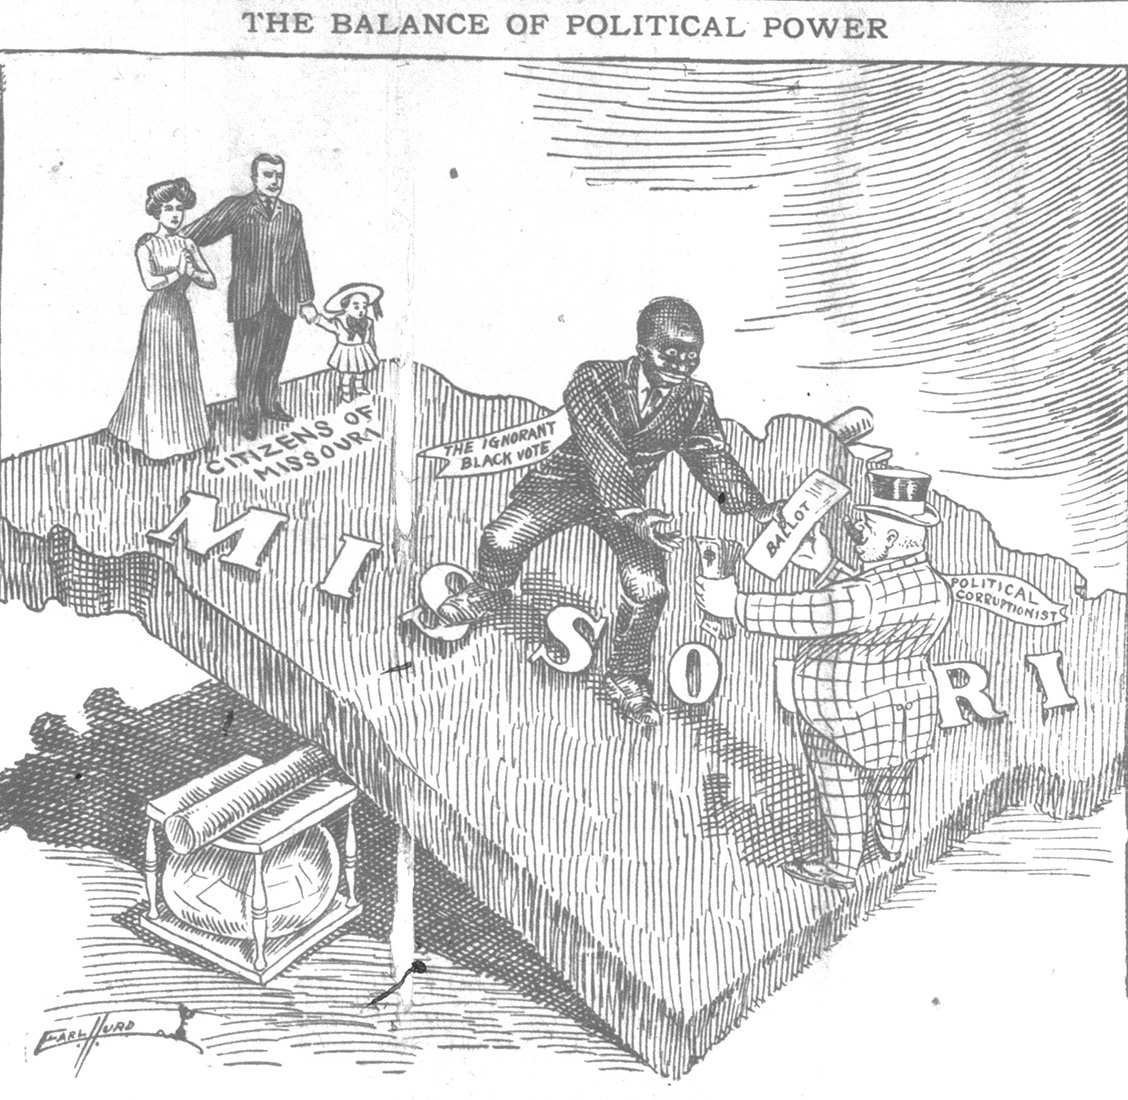 A 1908 cartoon depicting African American voters in Missouri as susceptible to corruption.